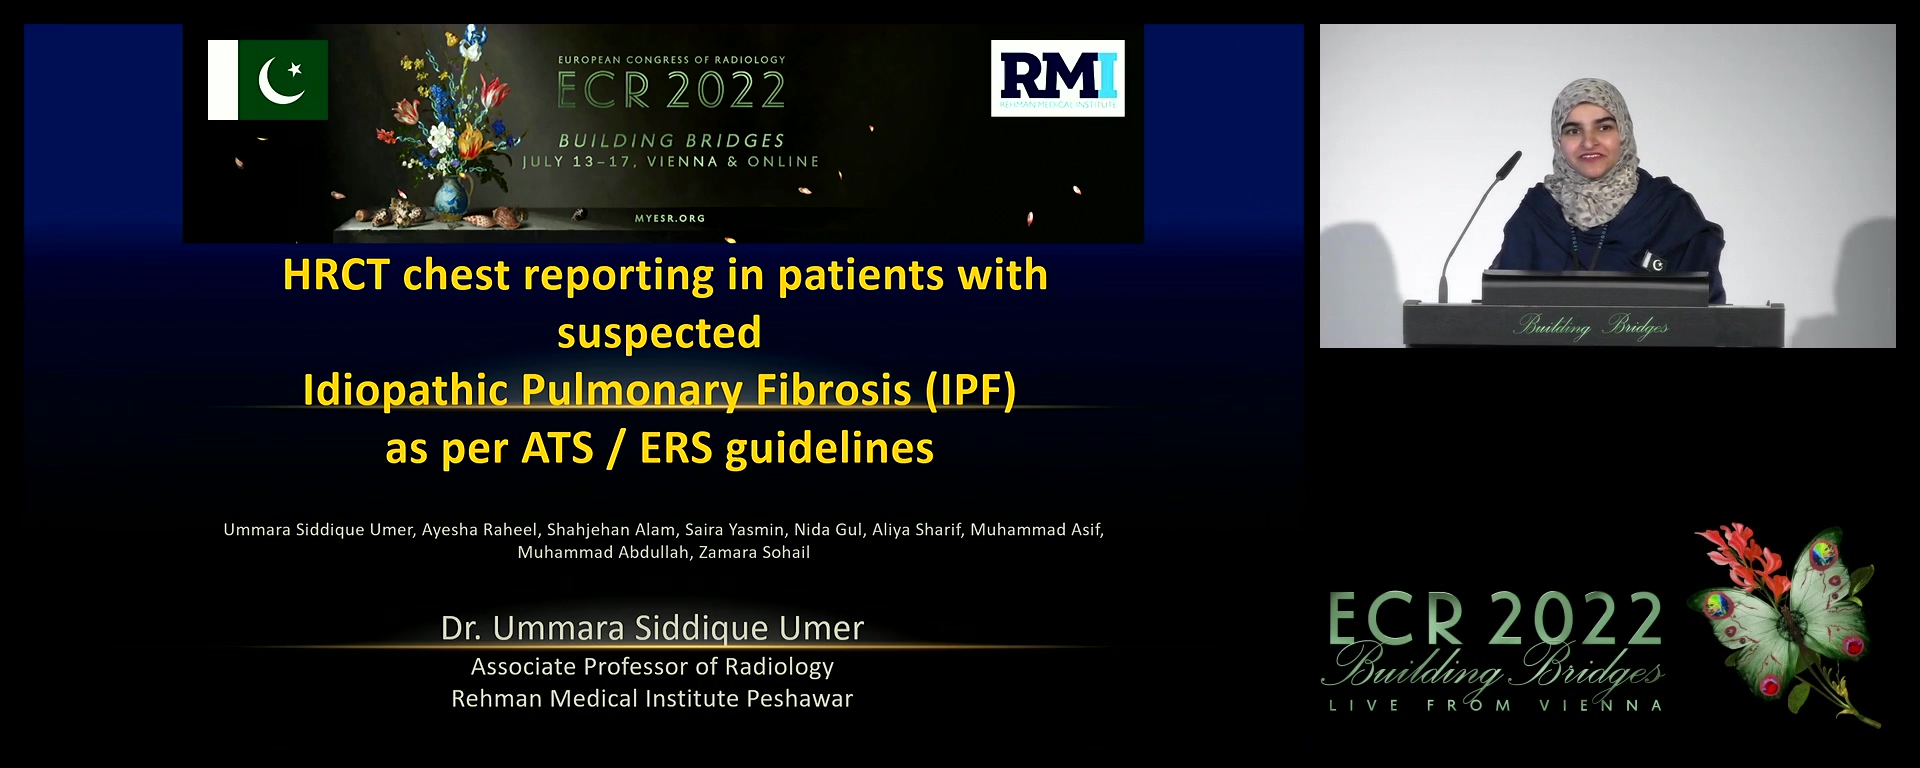 HRCT chest reporting in patients with suspected idiopathic pulmonary fibrosis (IPF) as per ATS / ERS guidelines - Ummara Siddique Umer, Peshawar / PK